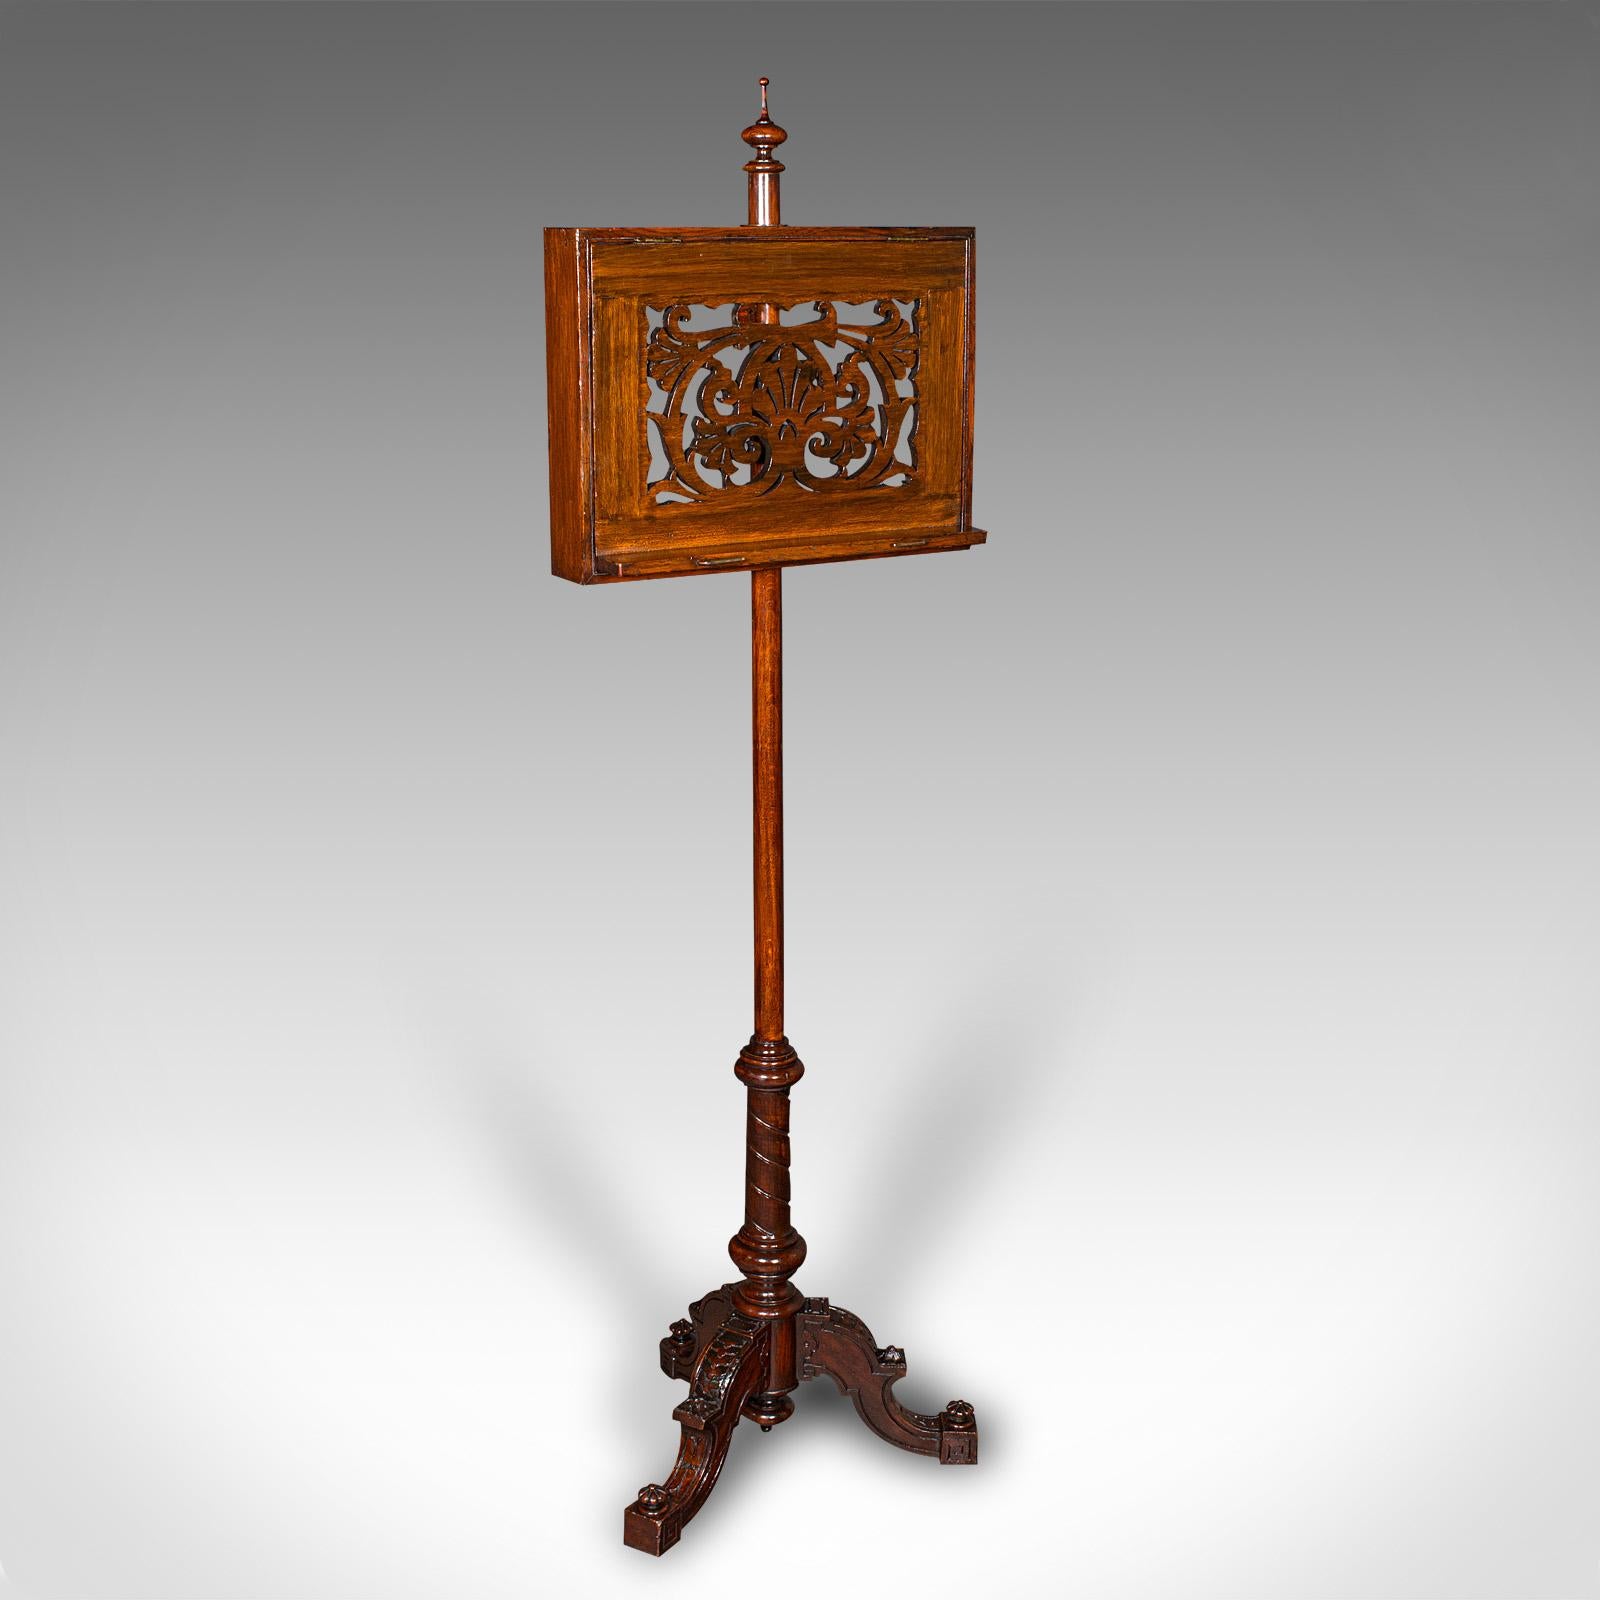 This is a tall antique music stand. An English, oak adjustable recital rest, dating to the late Victorian period, circa 1880.

Strikingly decorative stand with fine craftsmanship and of good proportion
Displays a desirable aged patina and in good